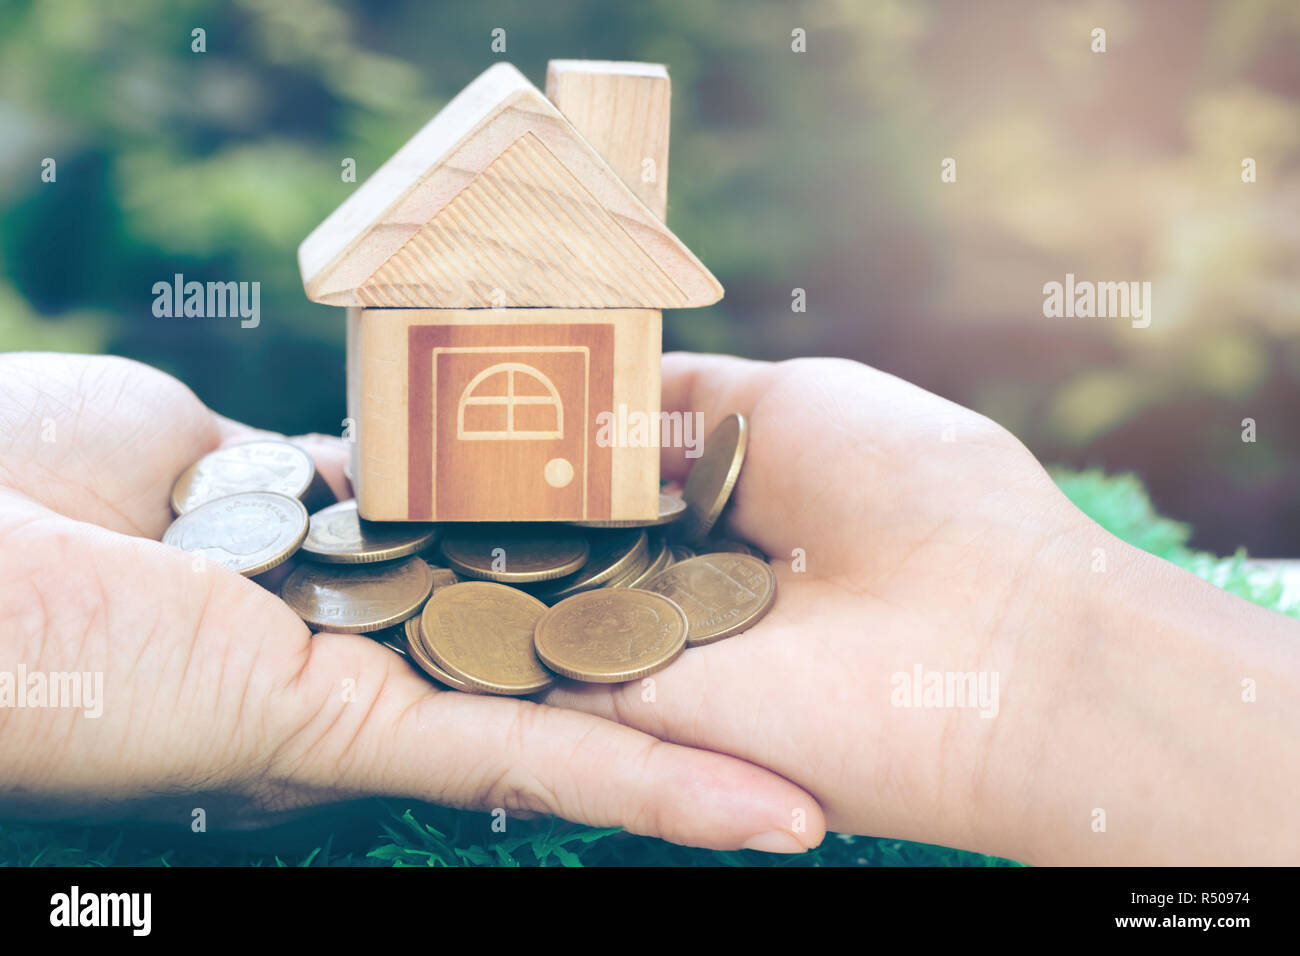 House placed on coins Men's hand is planning savings money of coins to buy a home concept concept for property ladder, mortgage and real estate invest Stock Photo